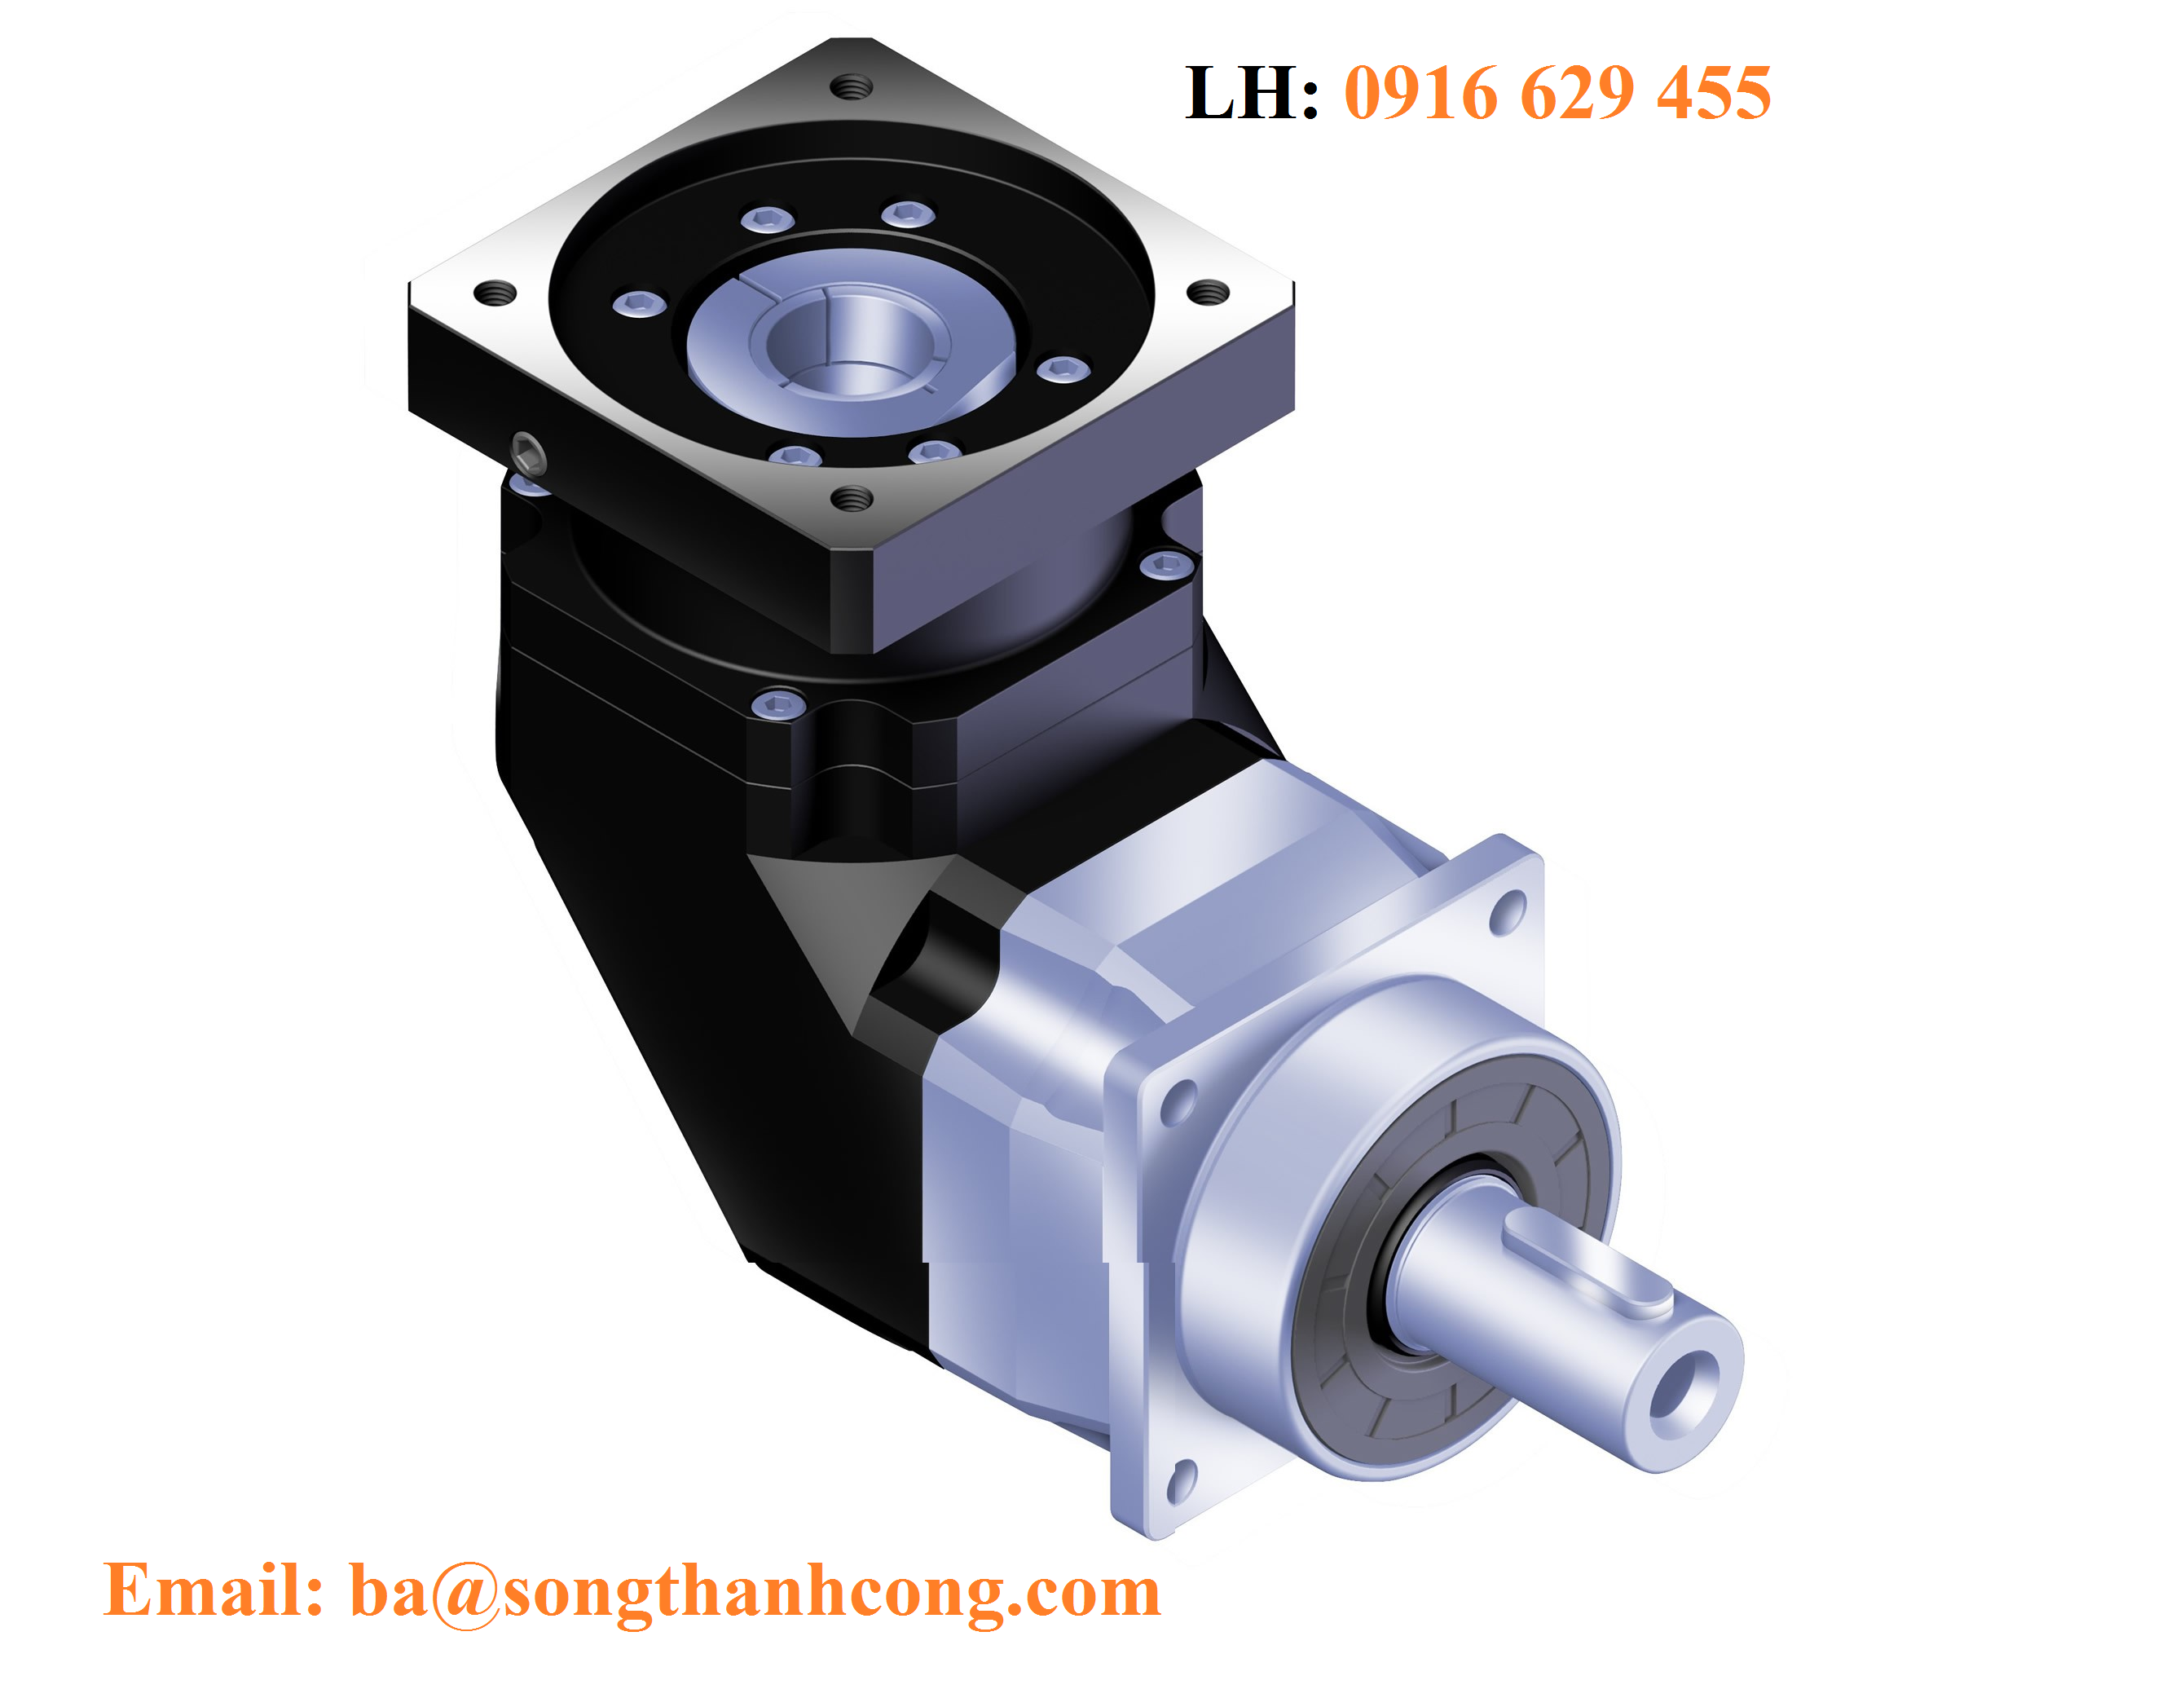 right-angle-gearboxes-apex-dynamics-abr-090-stc-vietnam.png